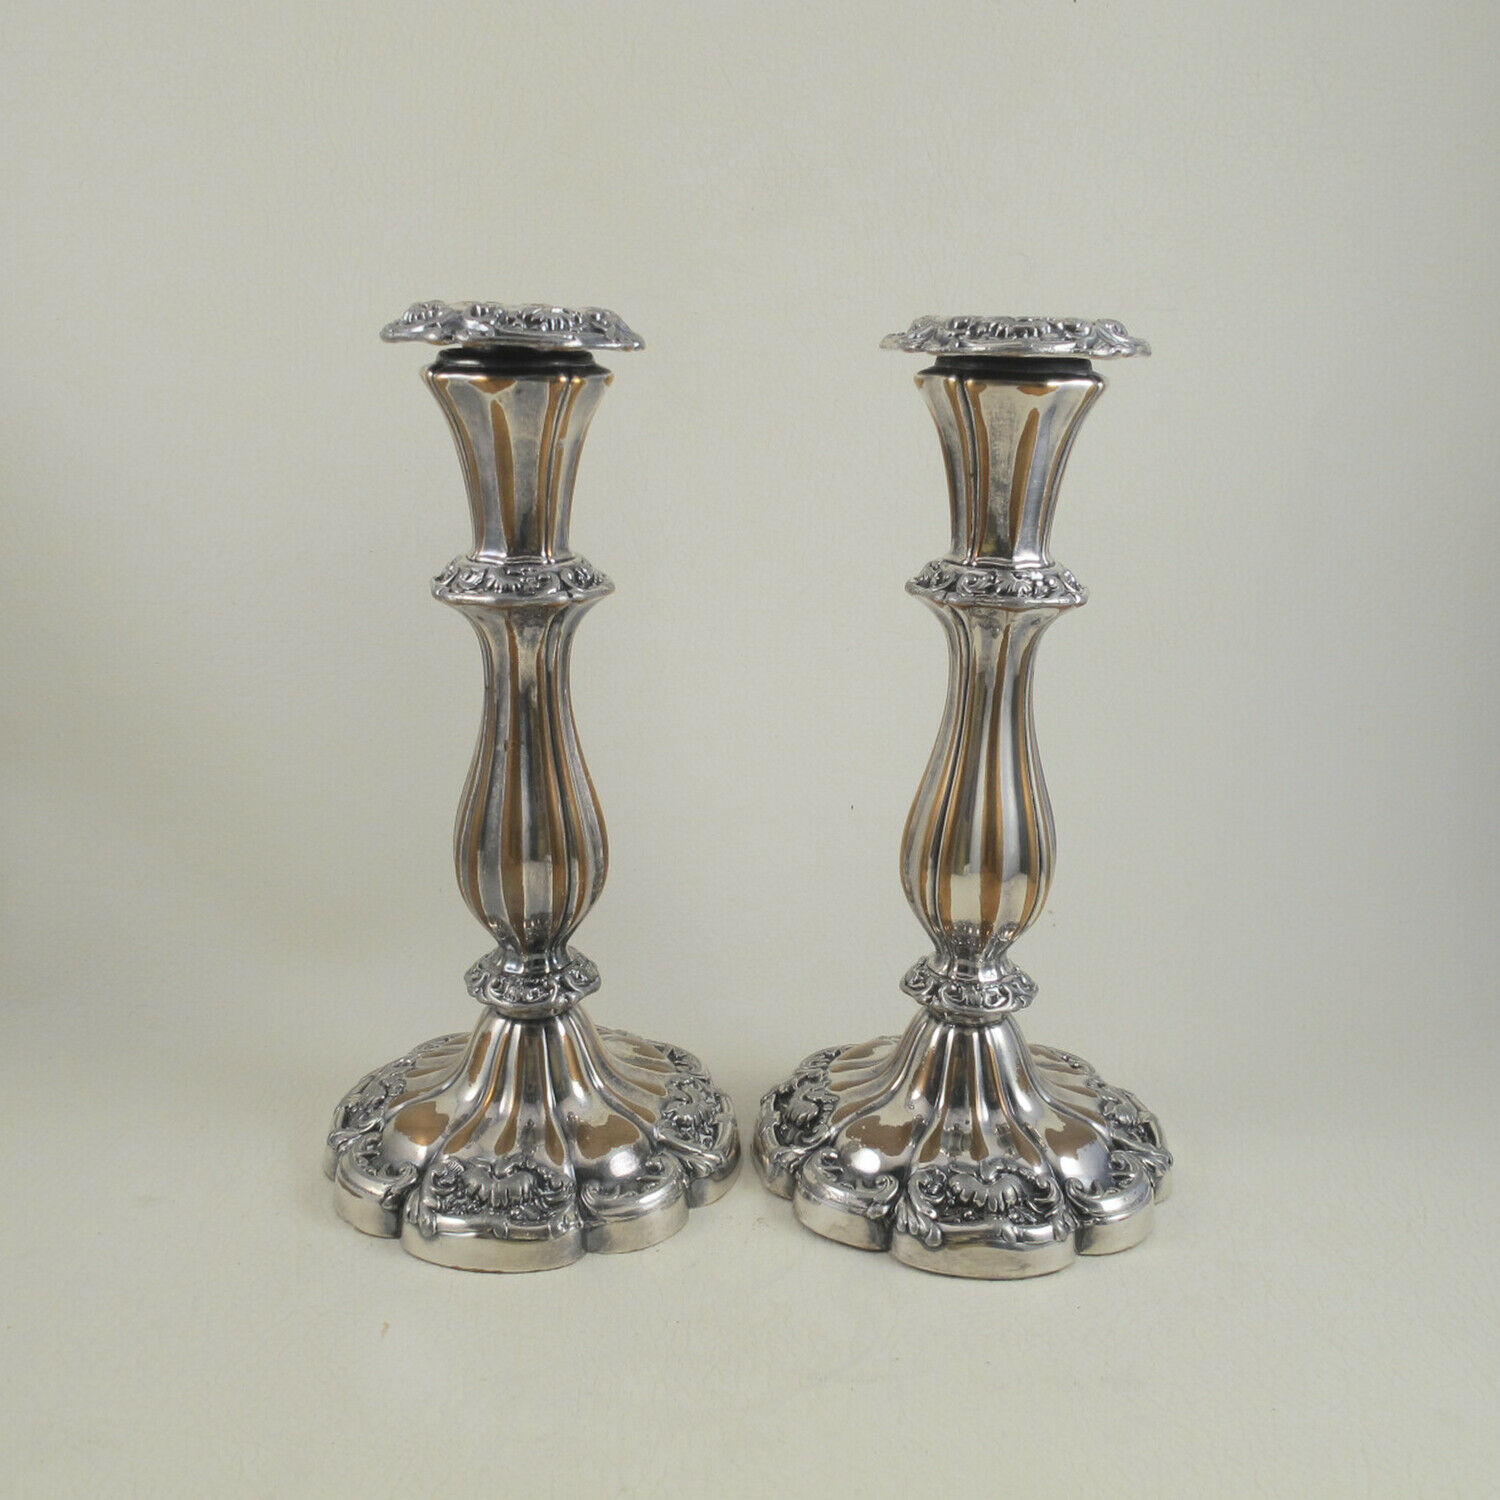 C1825 Old Sheffield Plate Silver Copper Pair Candlesticks Fluted Applied Shells